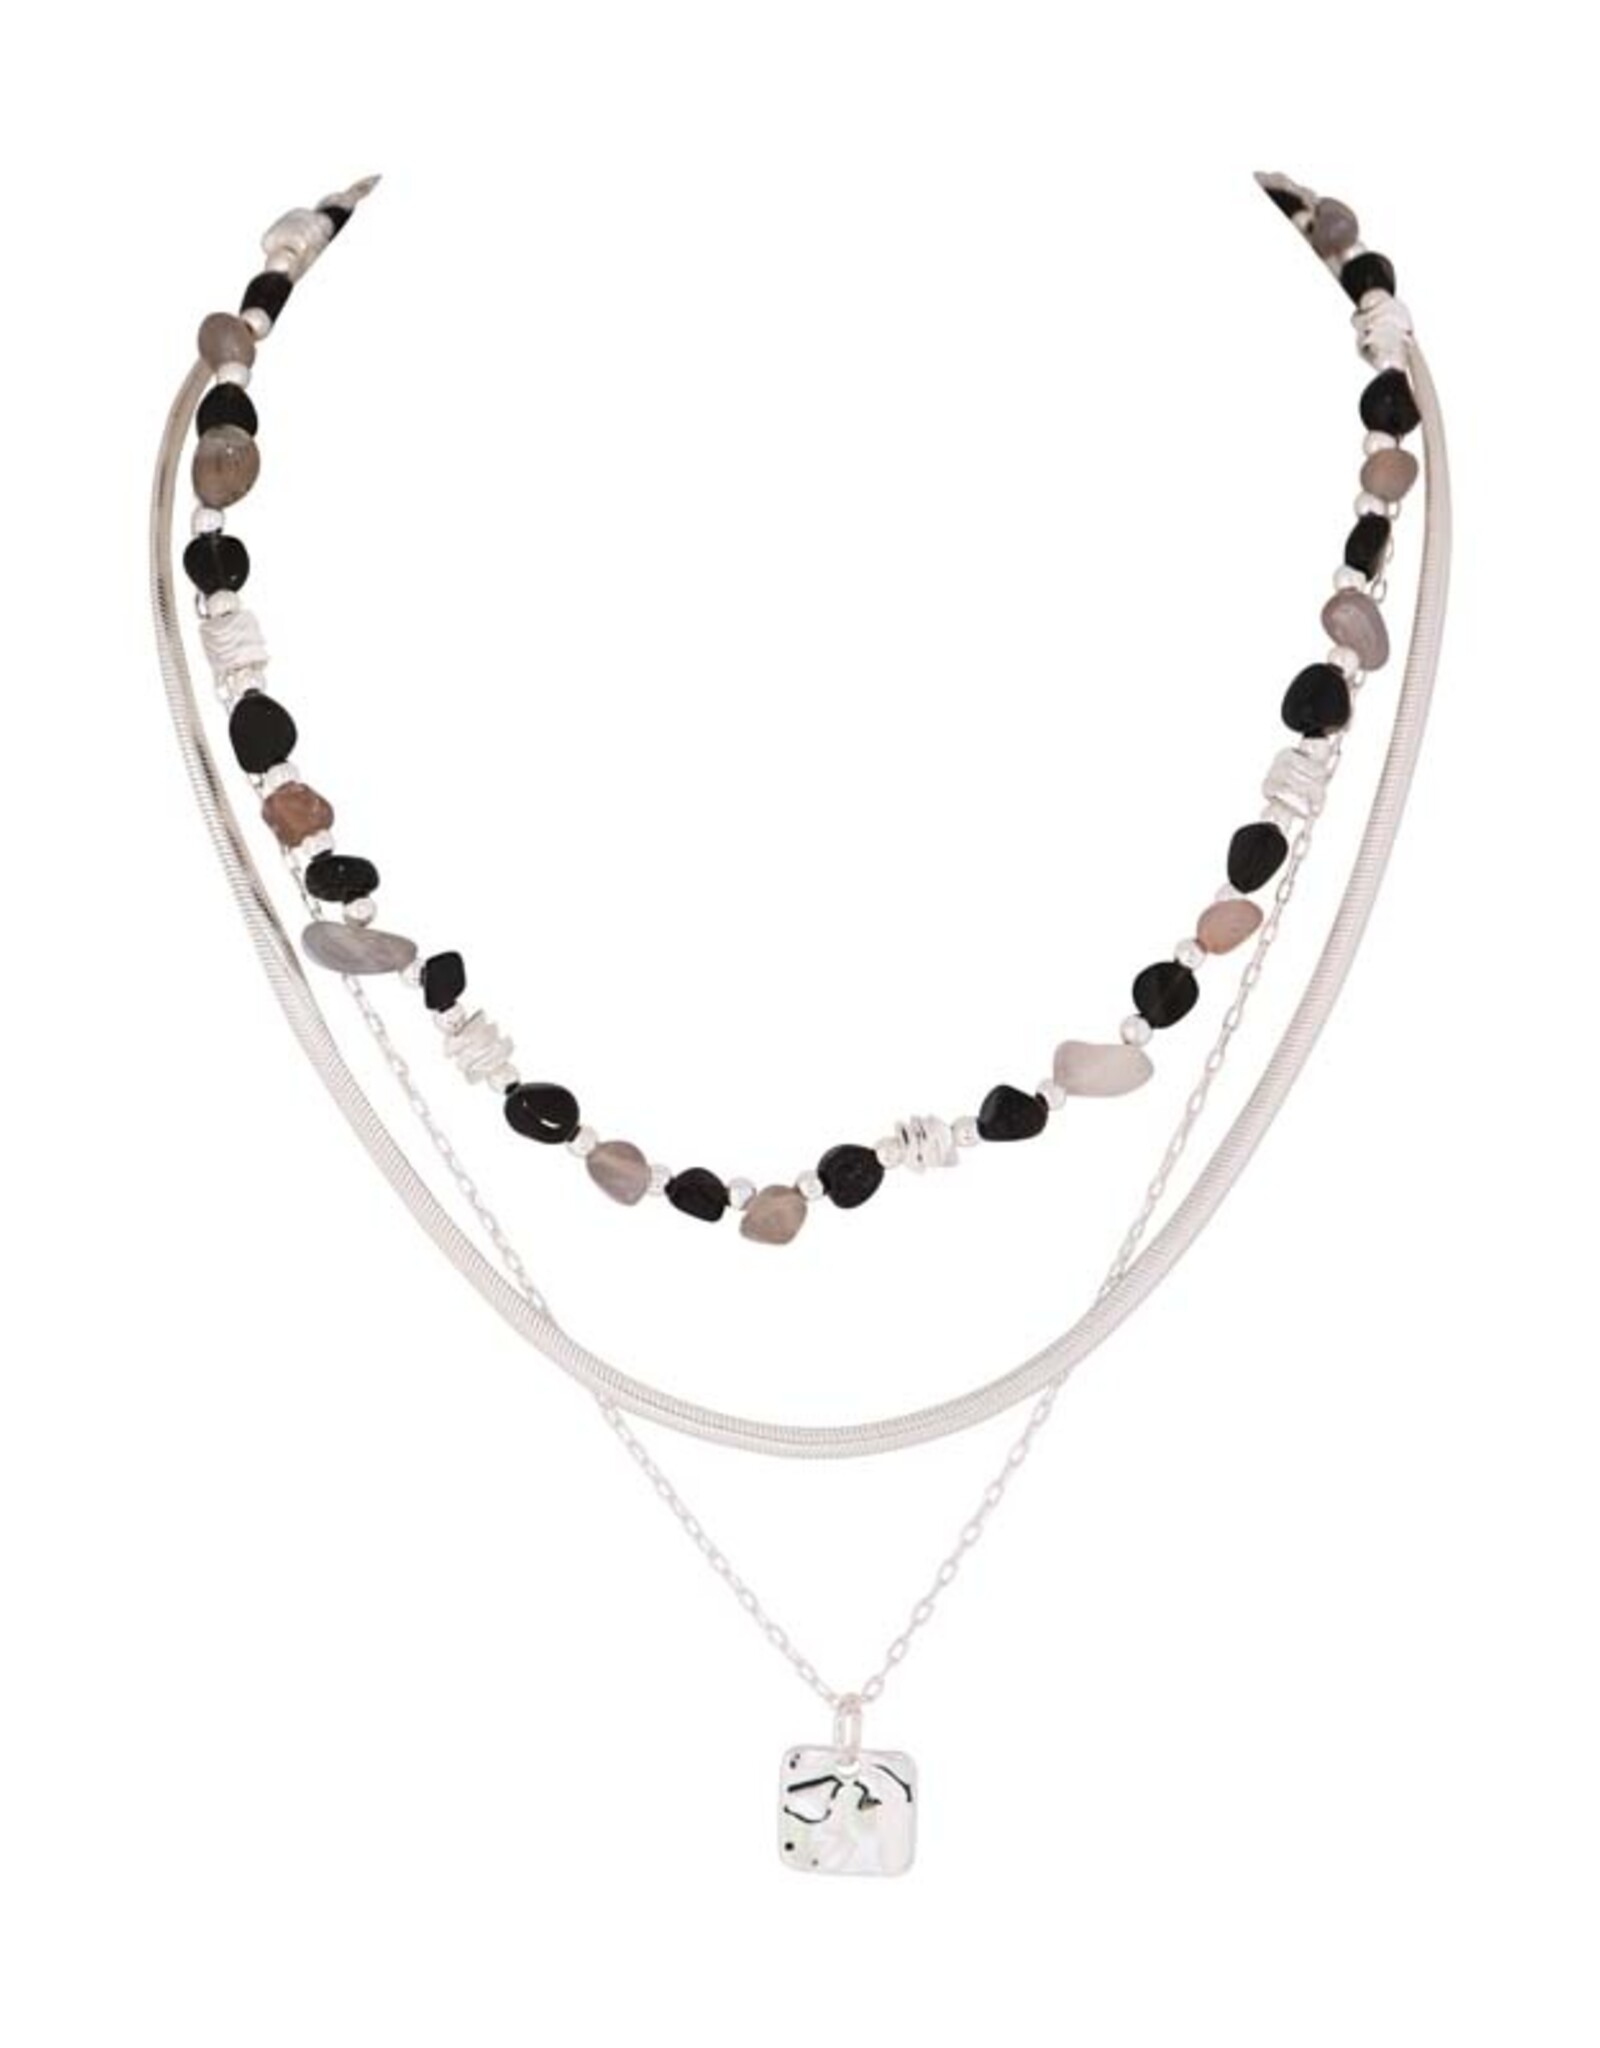 Merx Inc. Fashion Chain Necklace Silver BLK Beads 45+50+55cm+ext